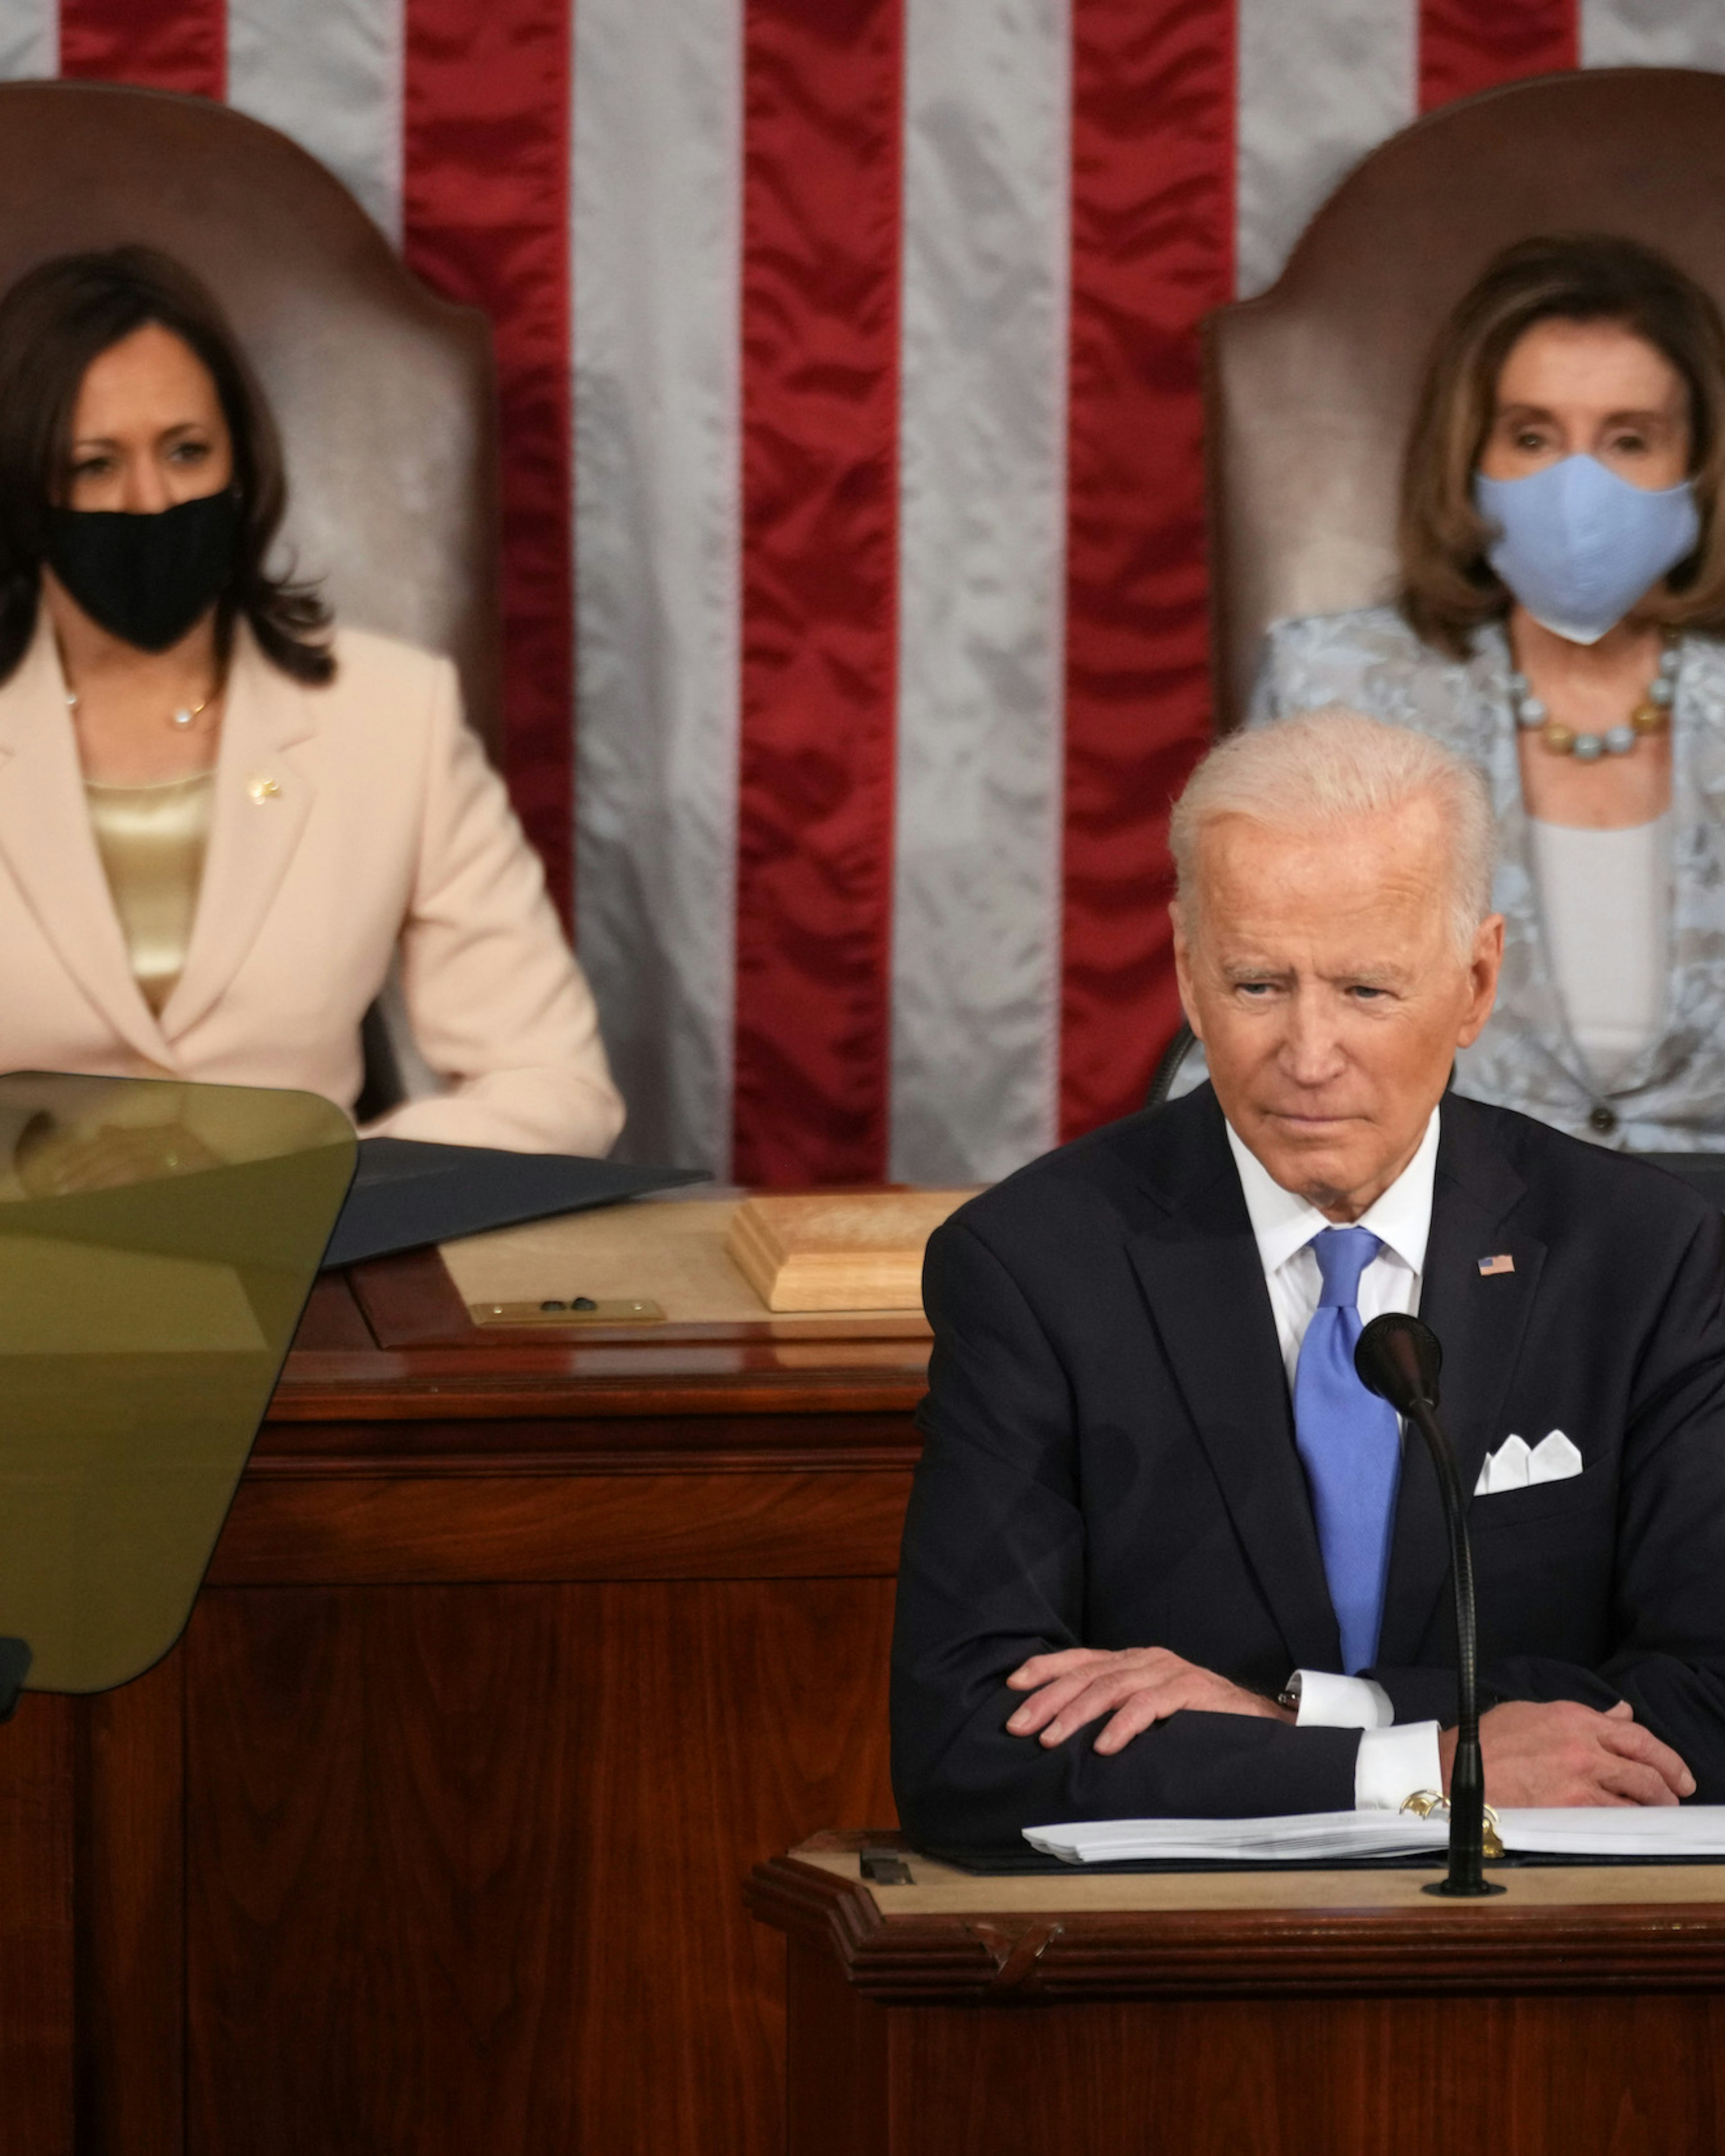 U.S. President Joe Biden pauses while speaking during a joint session of Congress at the U.S. Capitol in Washington, D.C., U.S., on Wednesday, April 28, 2021. Biden will unveil a sweeping $1.8 trillion plan to expand educational opportunities and child care for families, funded in part by the largest tax increases on wealthy Americans in decades, the centerpiece of his first address to Congress. Photographer: Doug Mills/The New York Times/Bloomberg